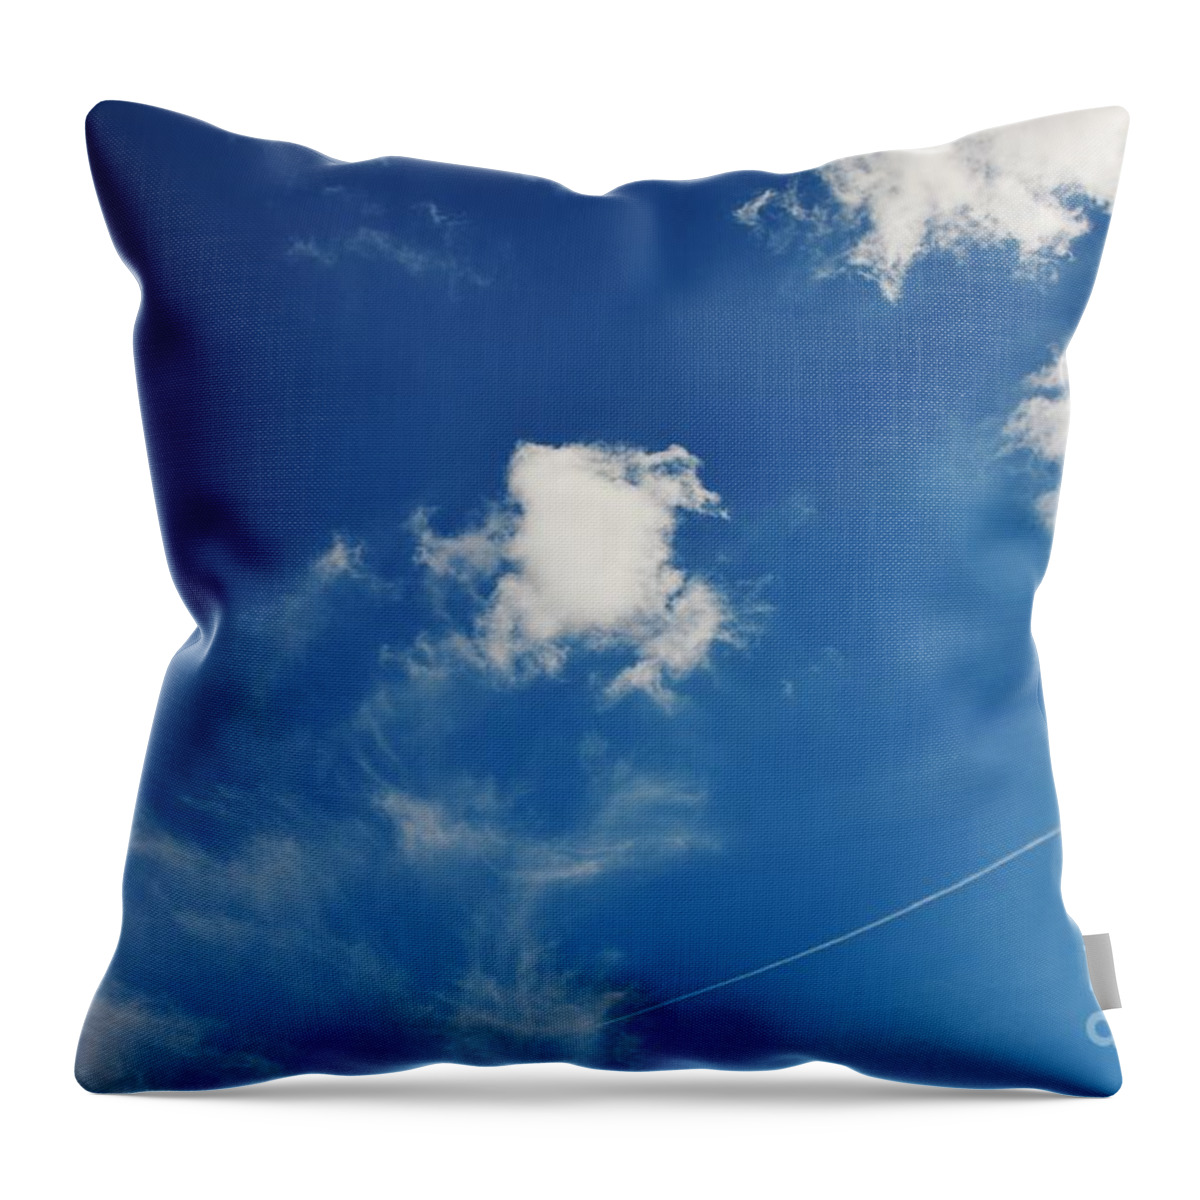 Desert Clouds Throw Pillow featuring the photograph LeapFroG by Angela J Wright